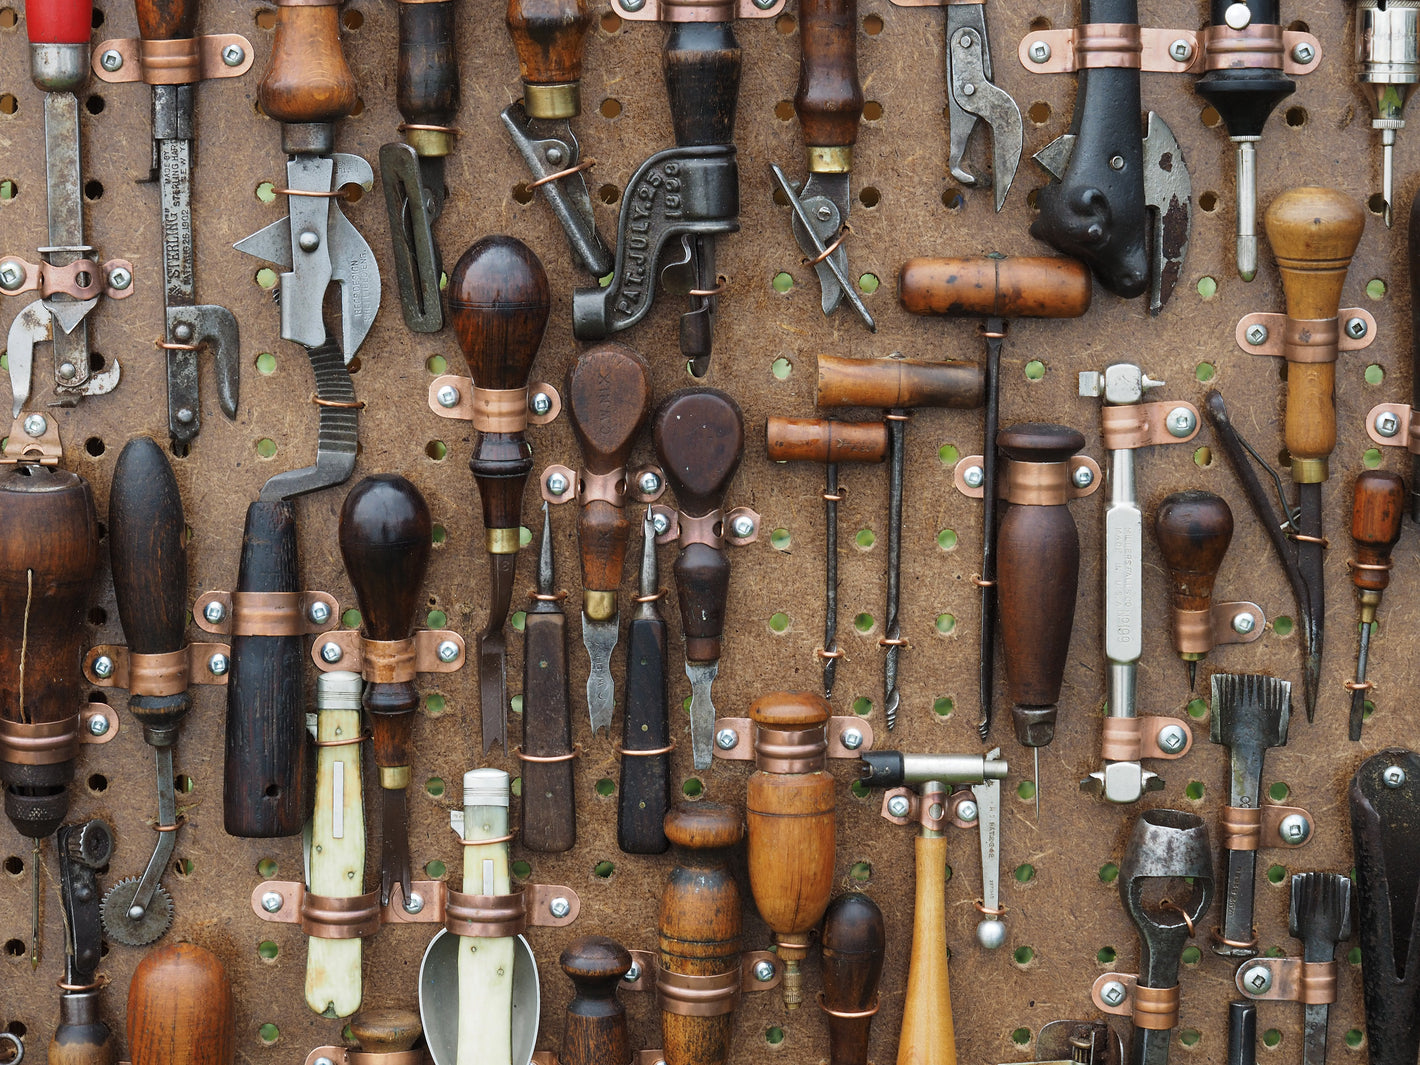 A wall pegboard of various vintage hand tools.